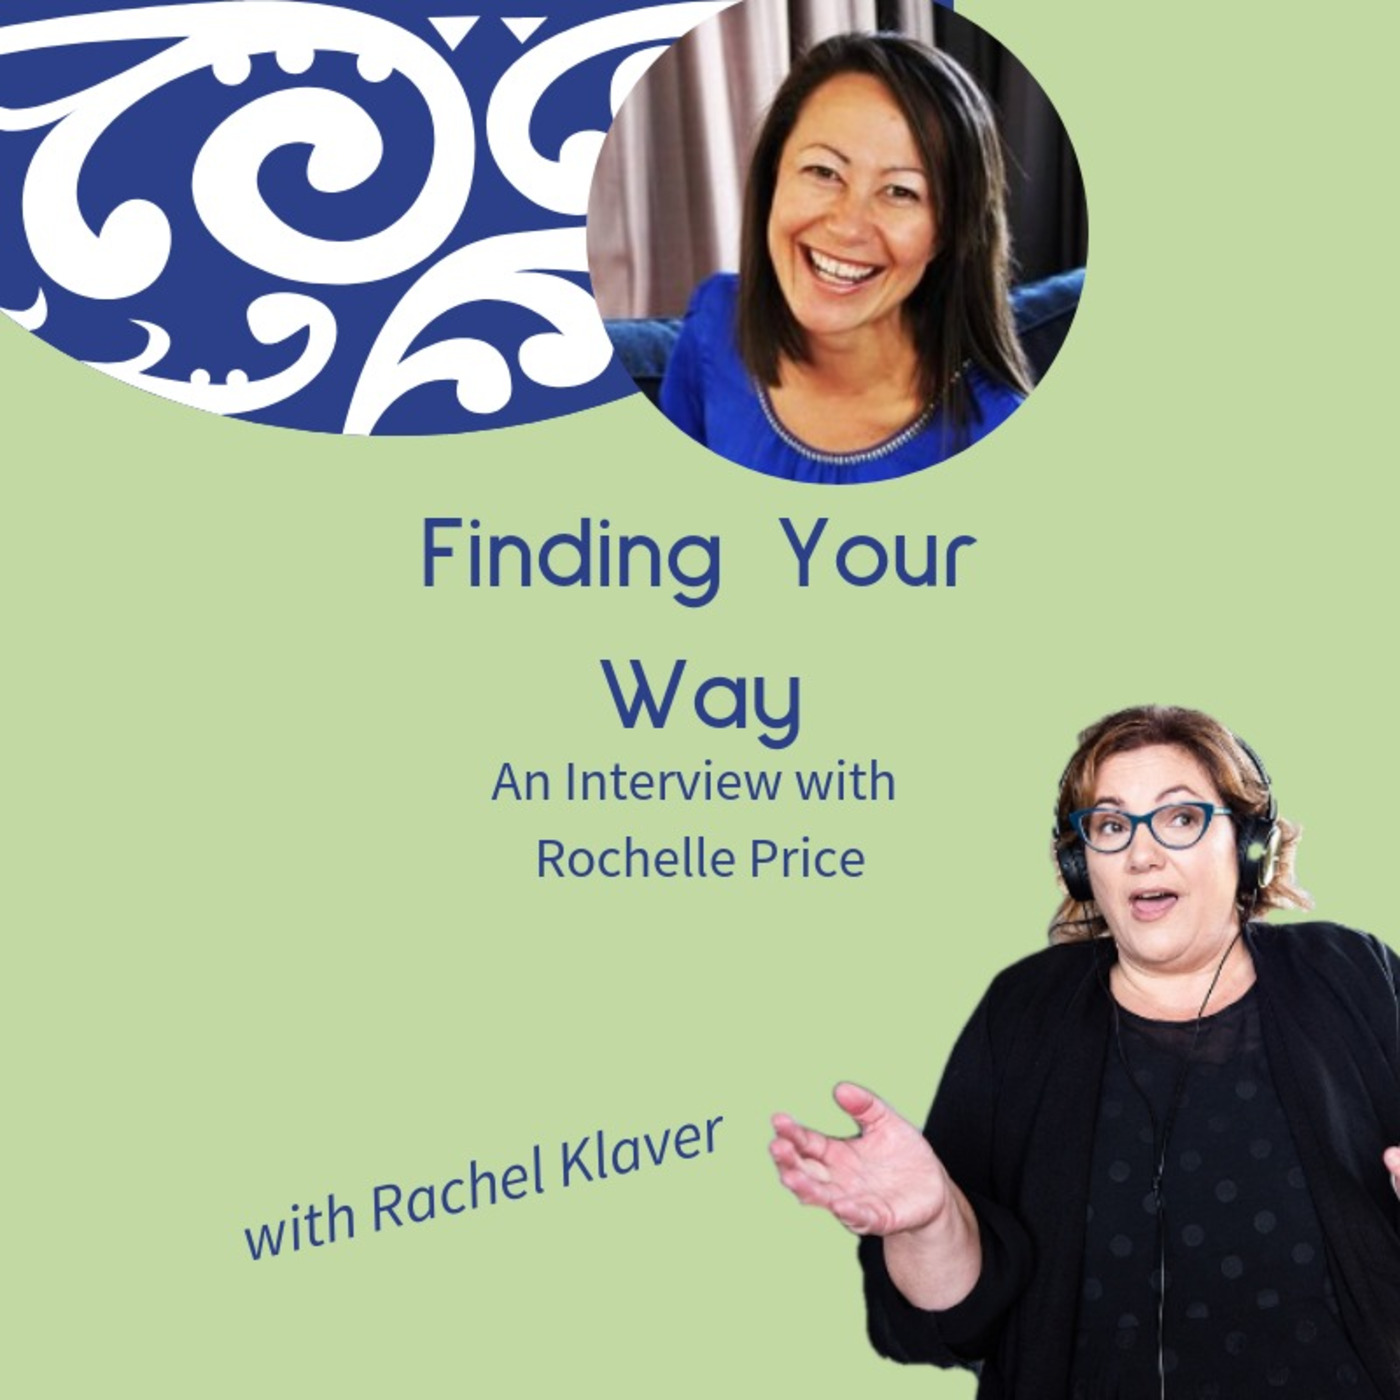 Finding Your Way with Rochelle Price